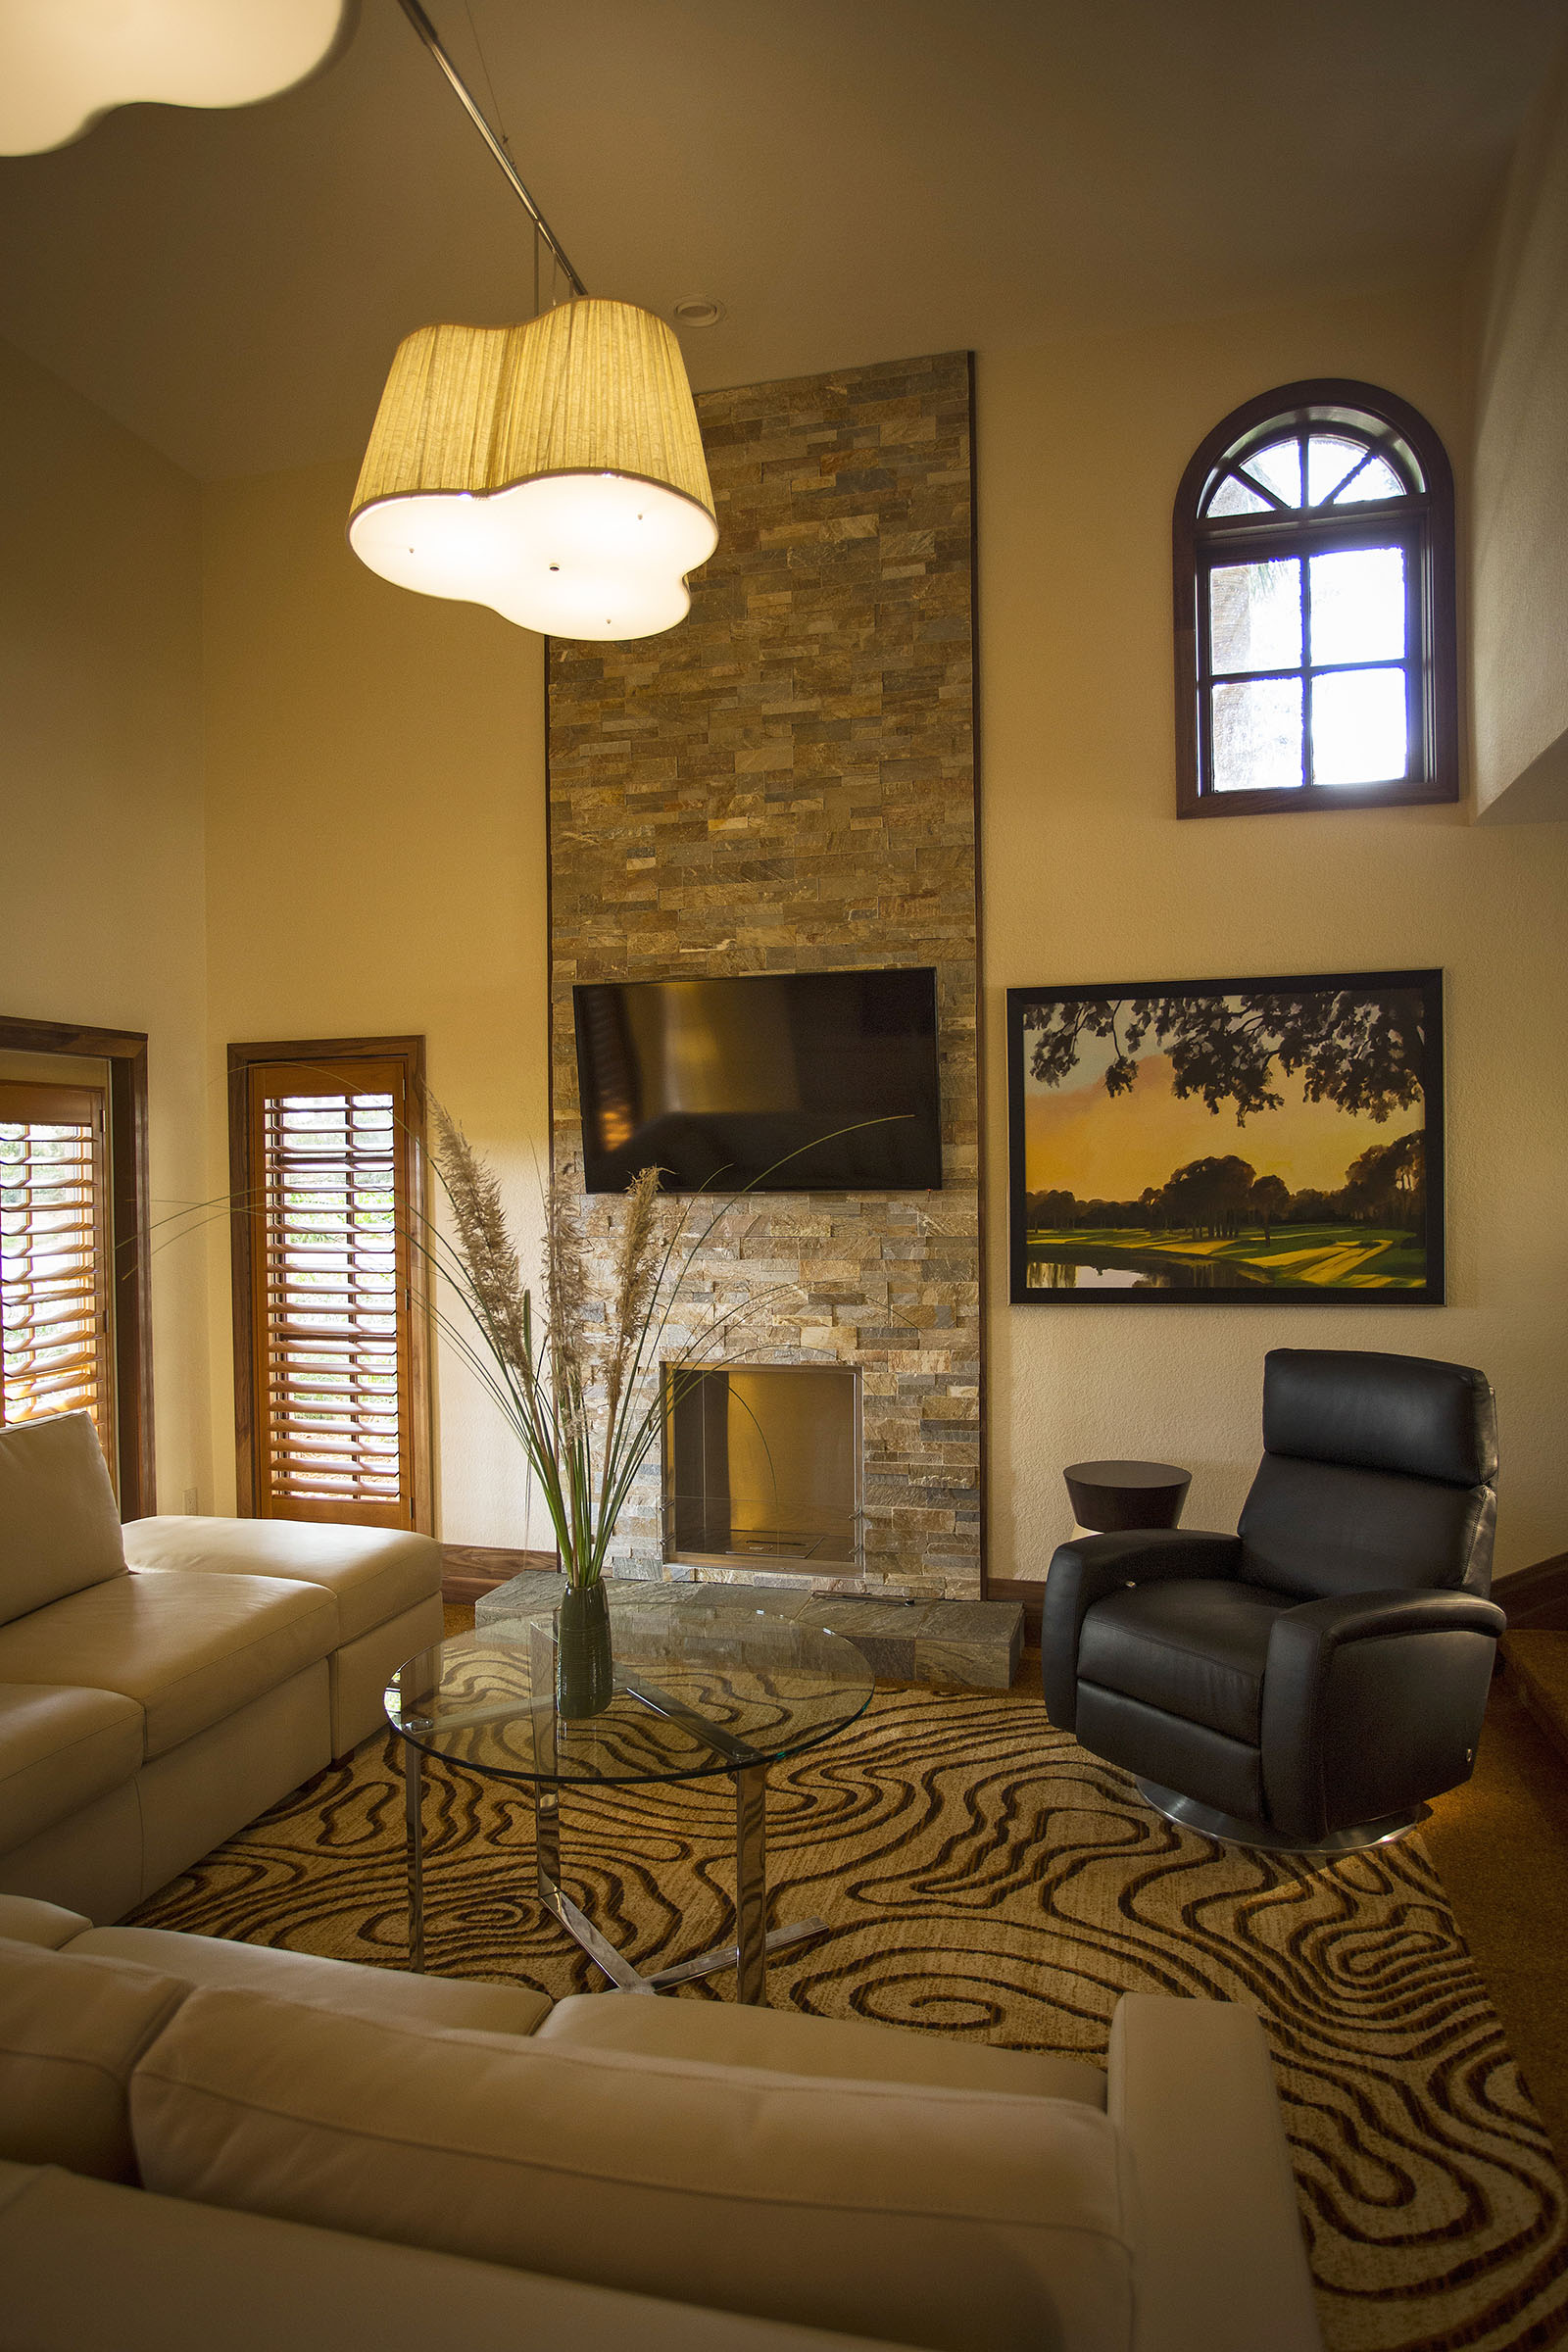 Living Space and room to roam at Villas of Grand Cypress